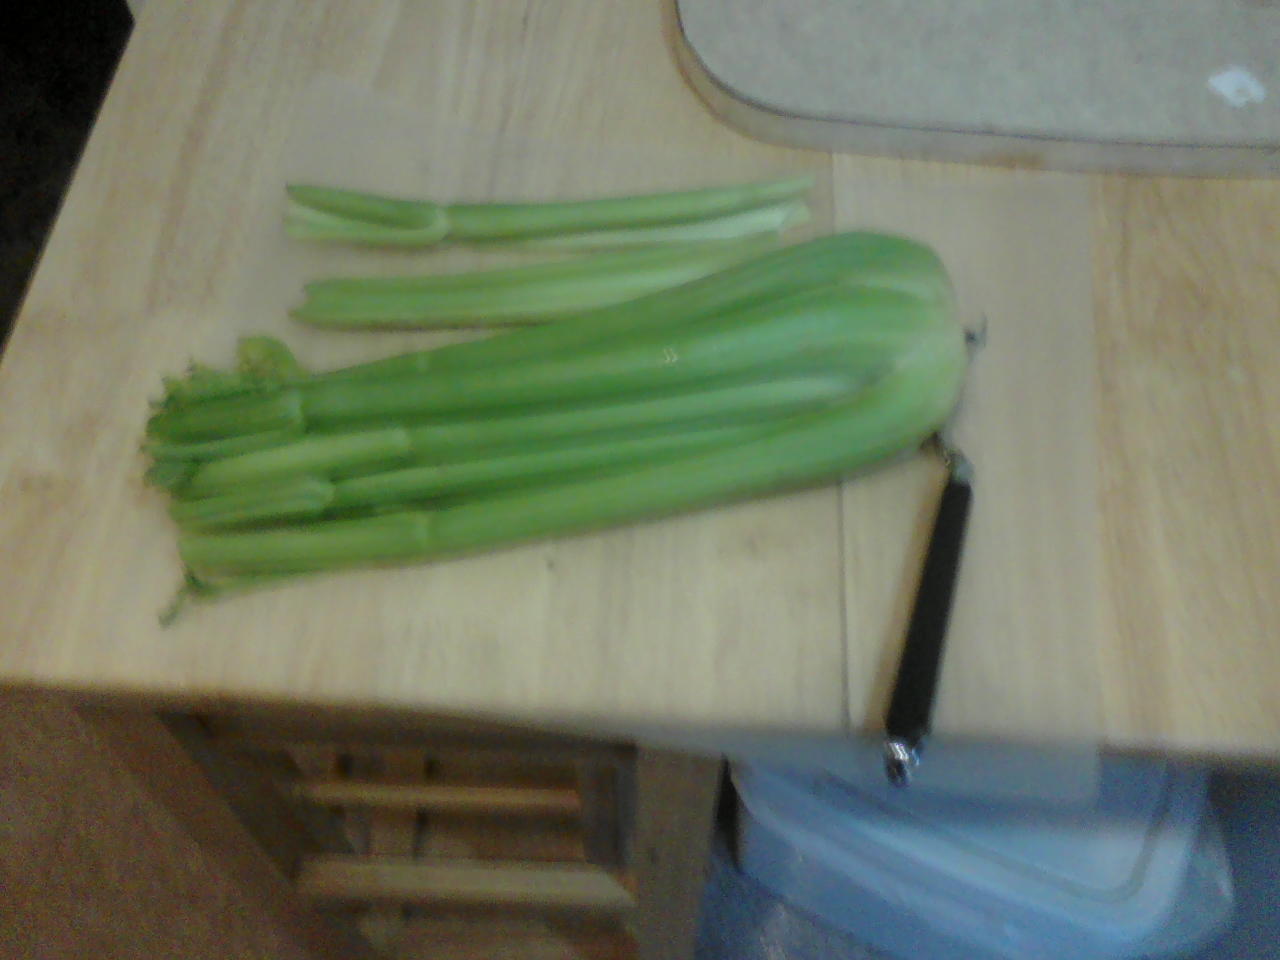 Take the old celery out of the fridge